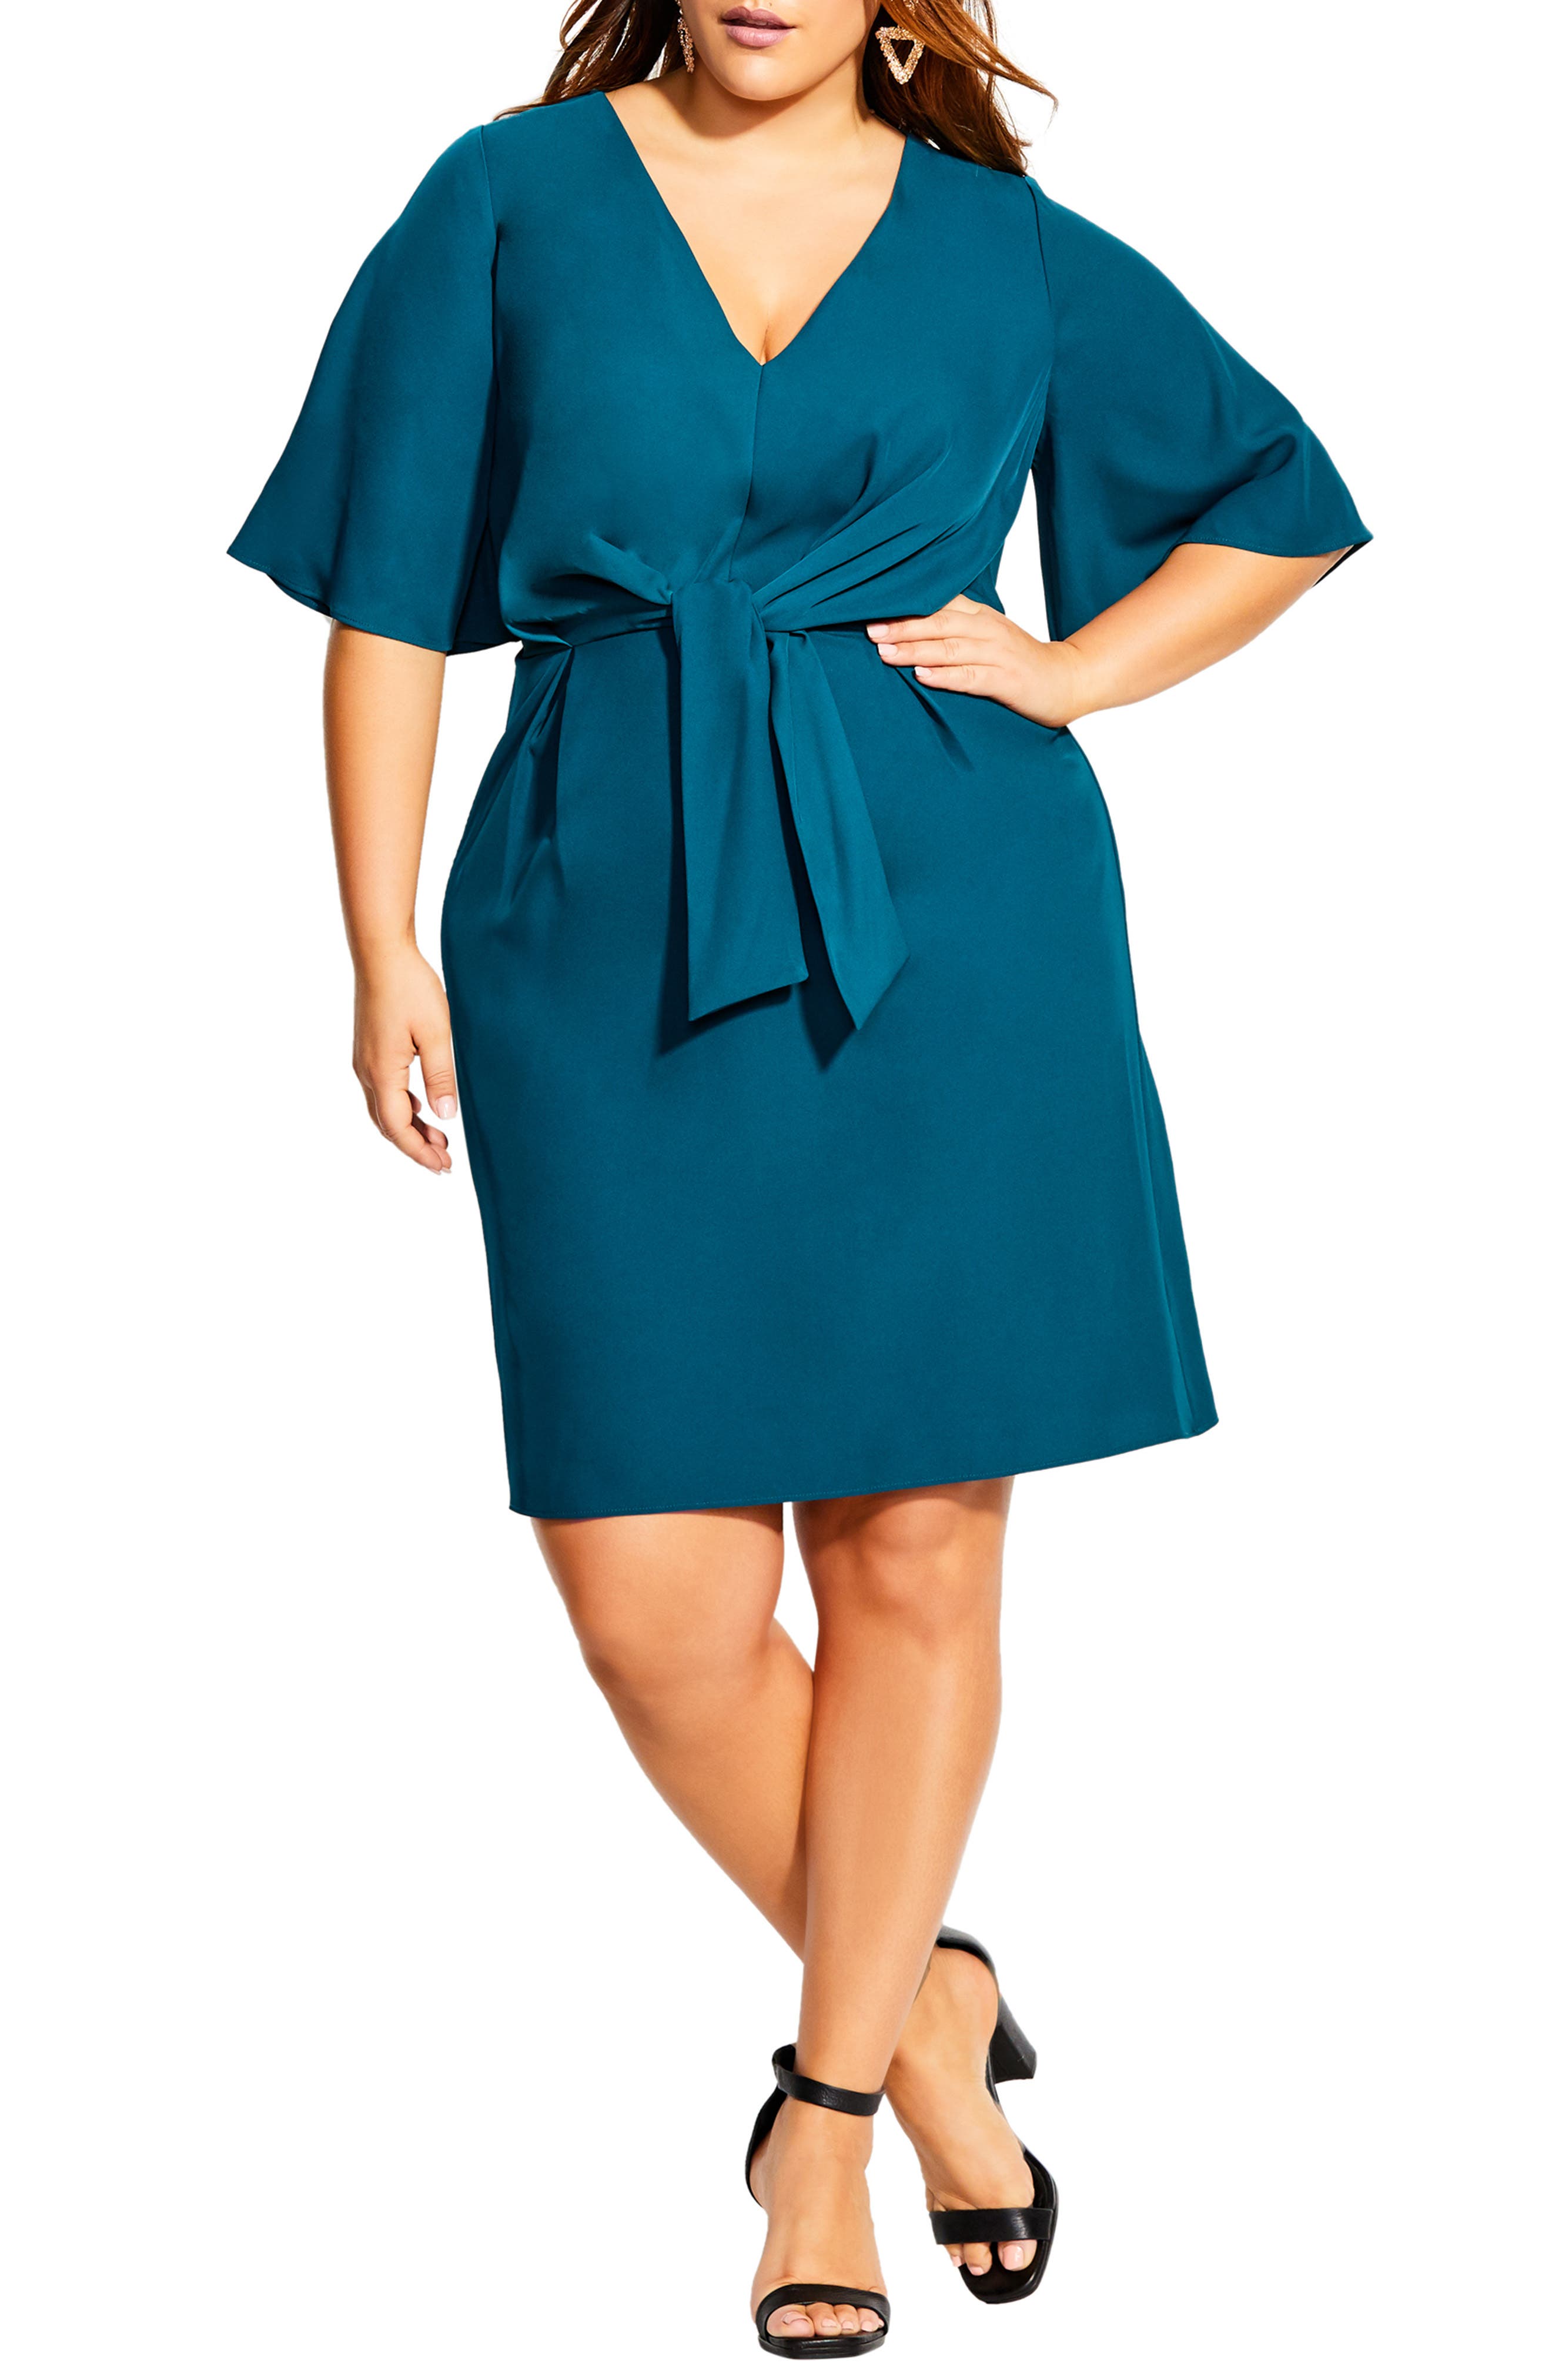 dresses to wear to a wedding plus size